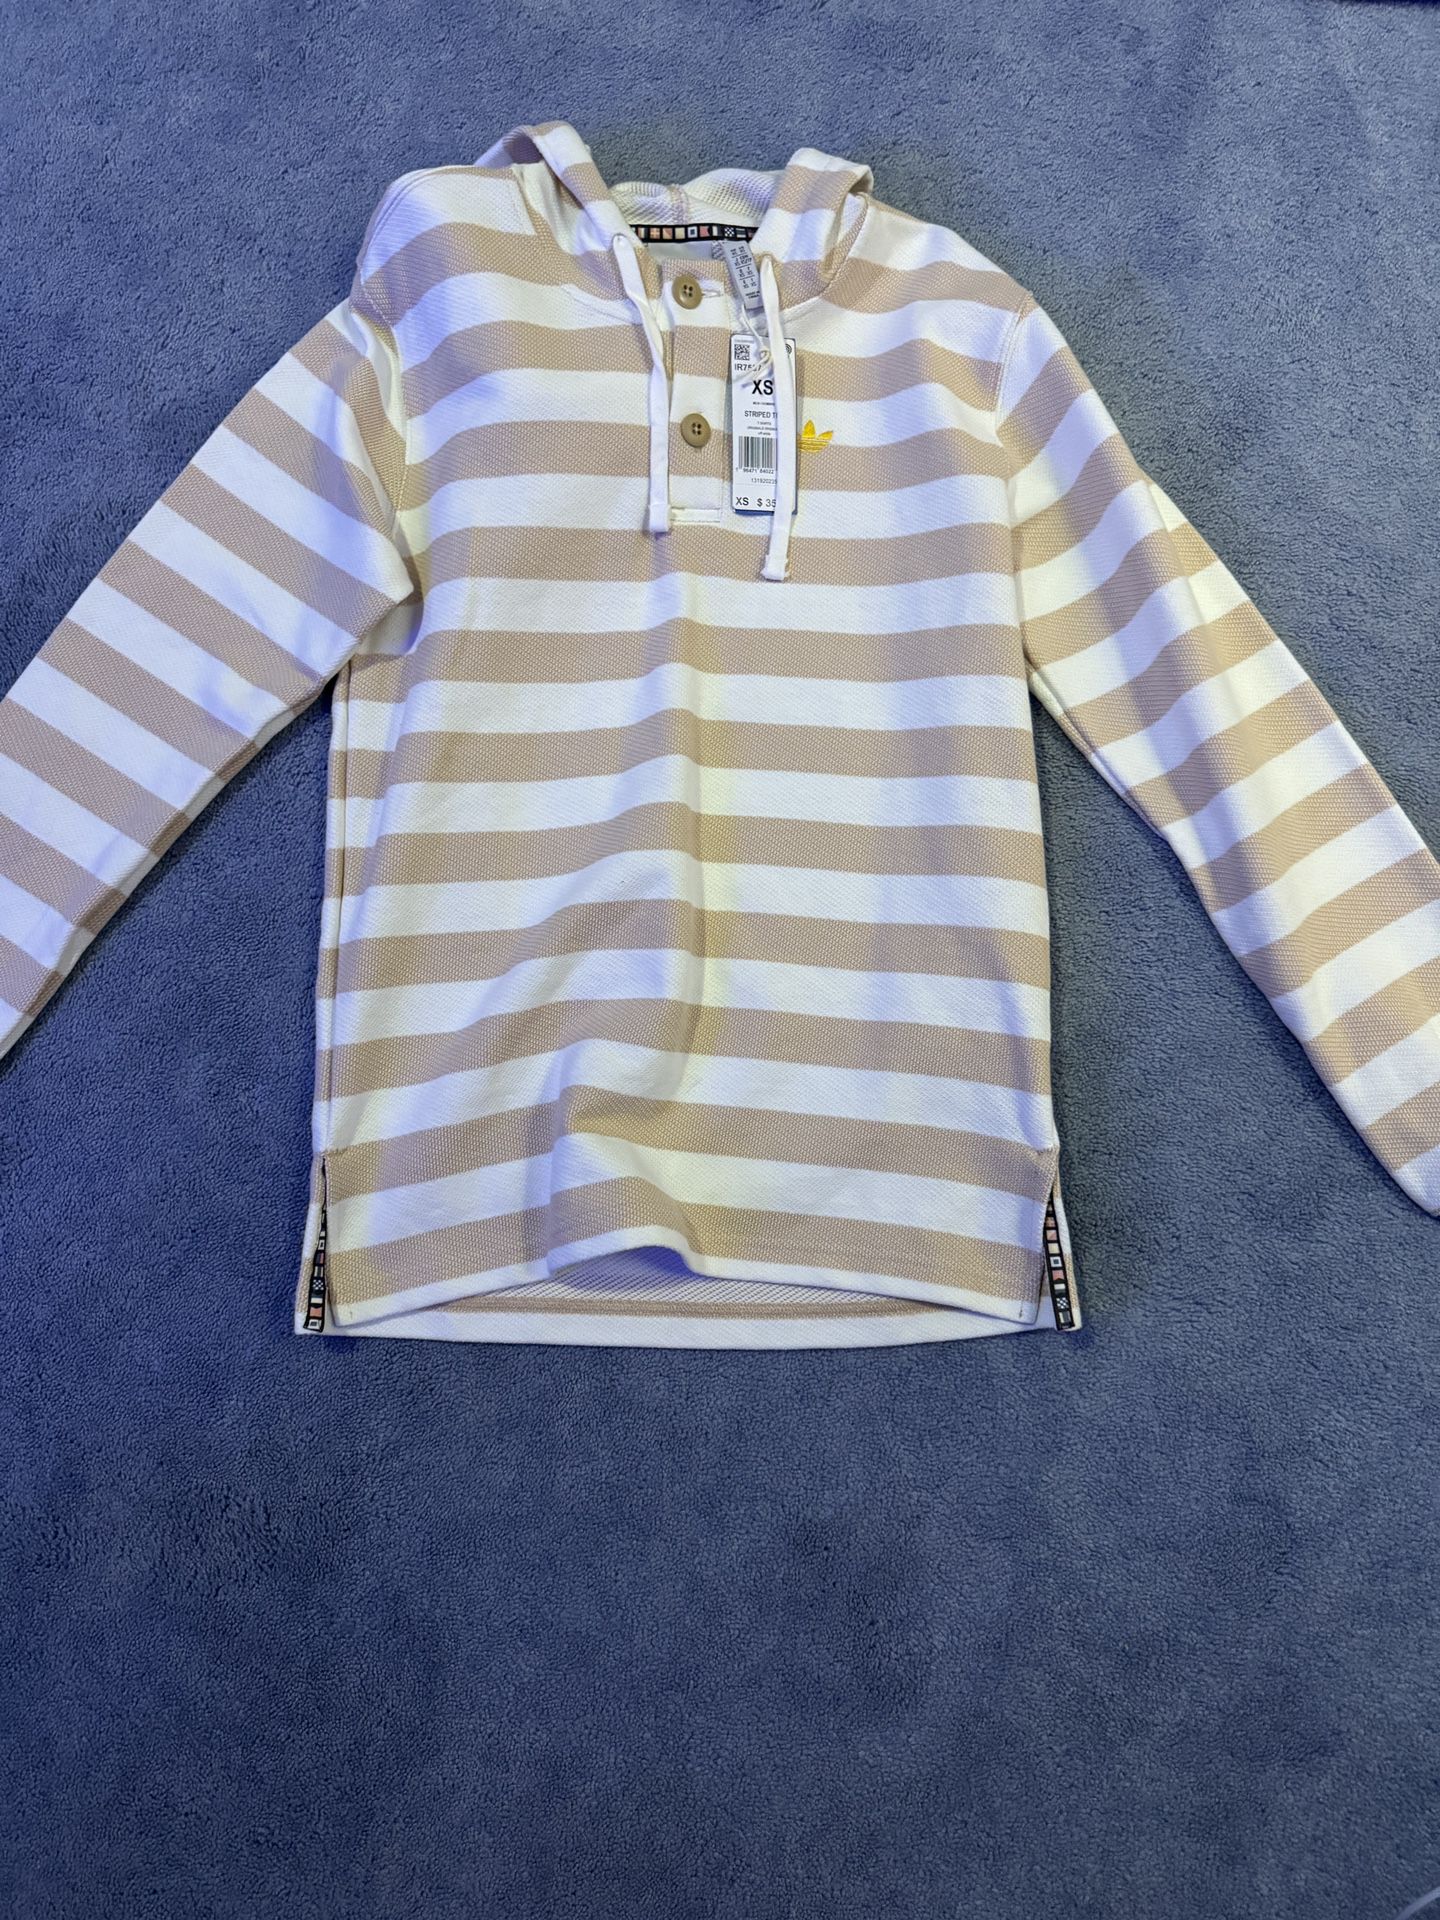 Stripped Adidas hoodie buttoned